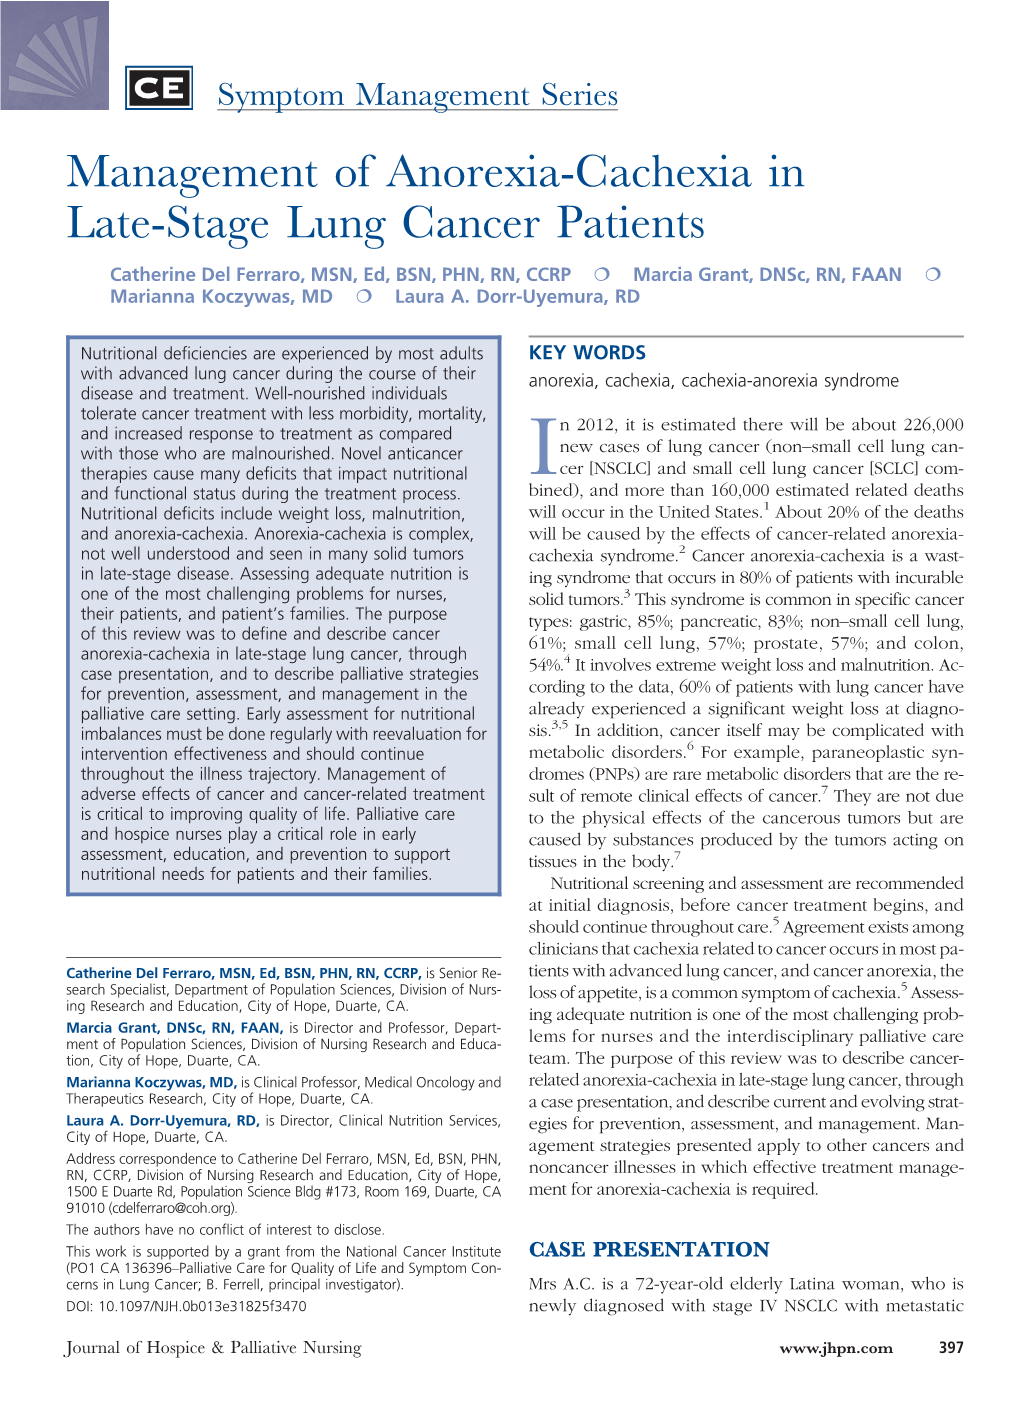 Management of Anorexia-Cachexia in Late-Stage Lung Cancer Patients